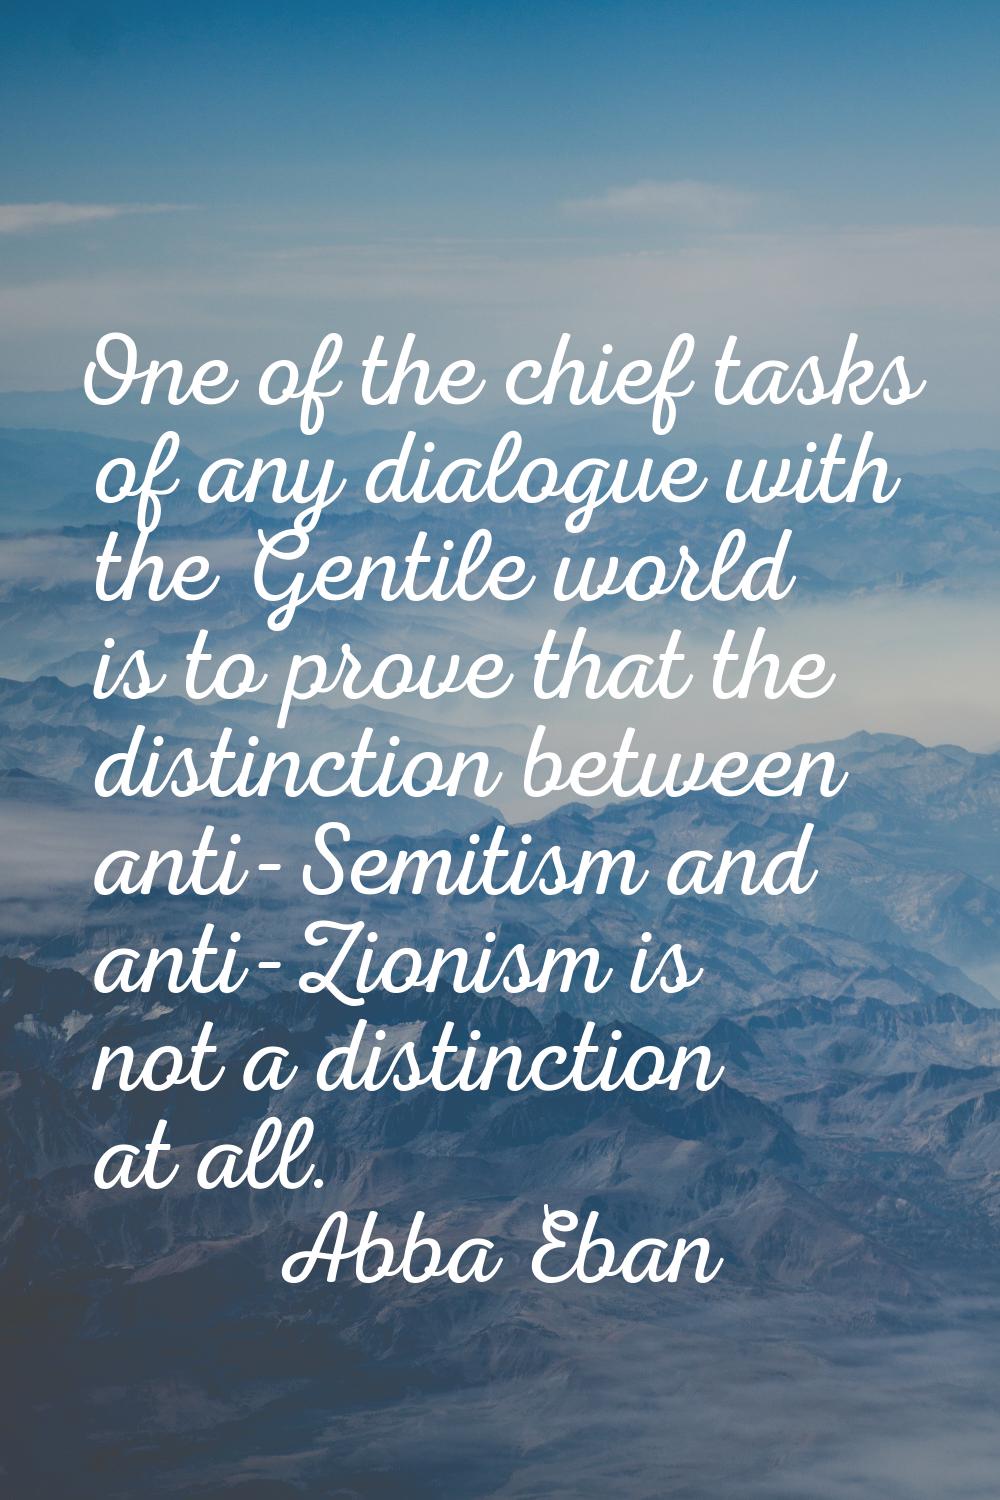 One of the chief tasks of any dialogue with the Gentile world is to prove that the distinction betw